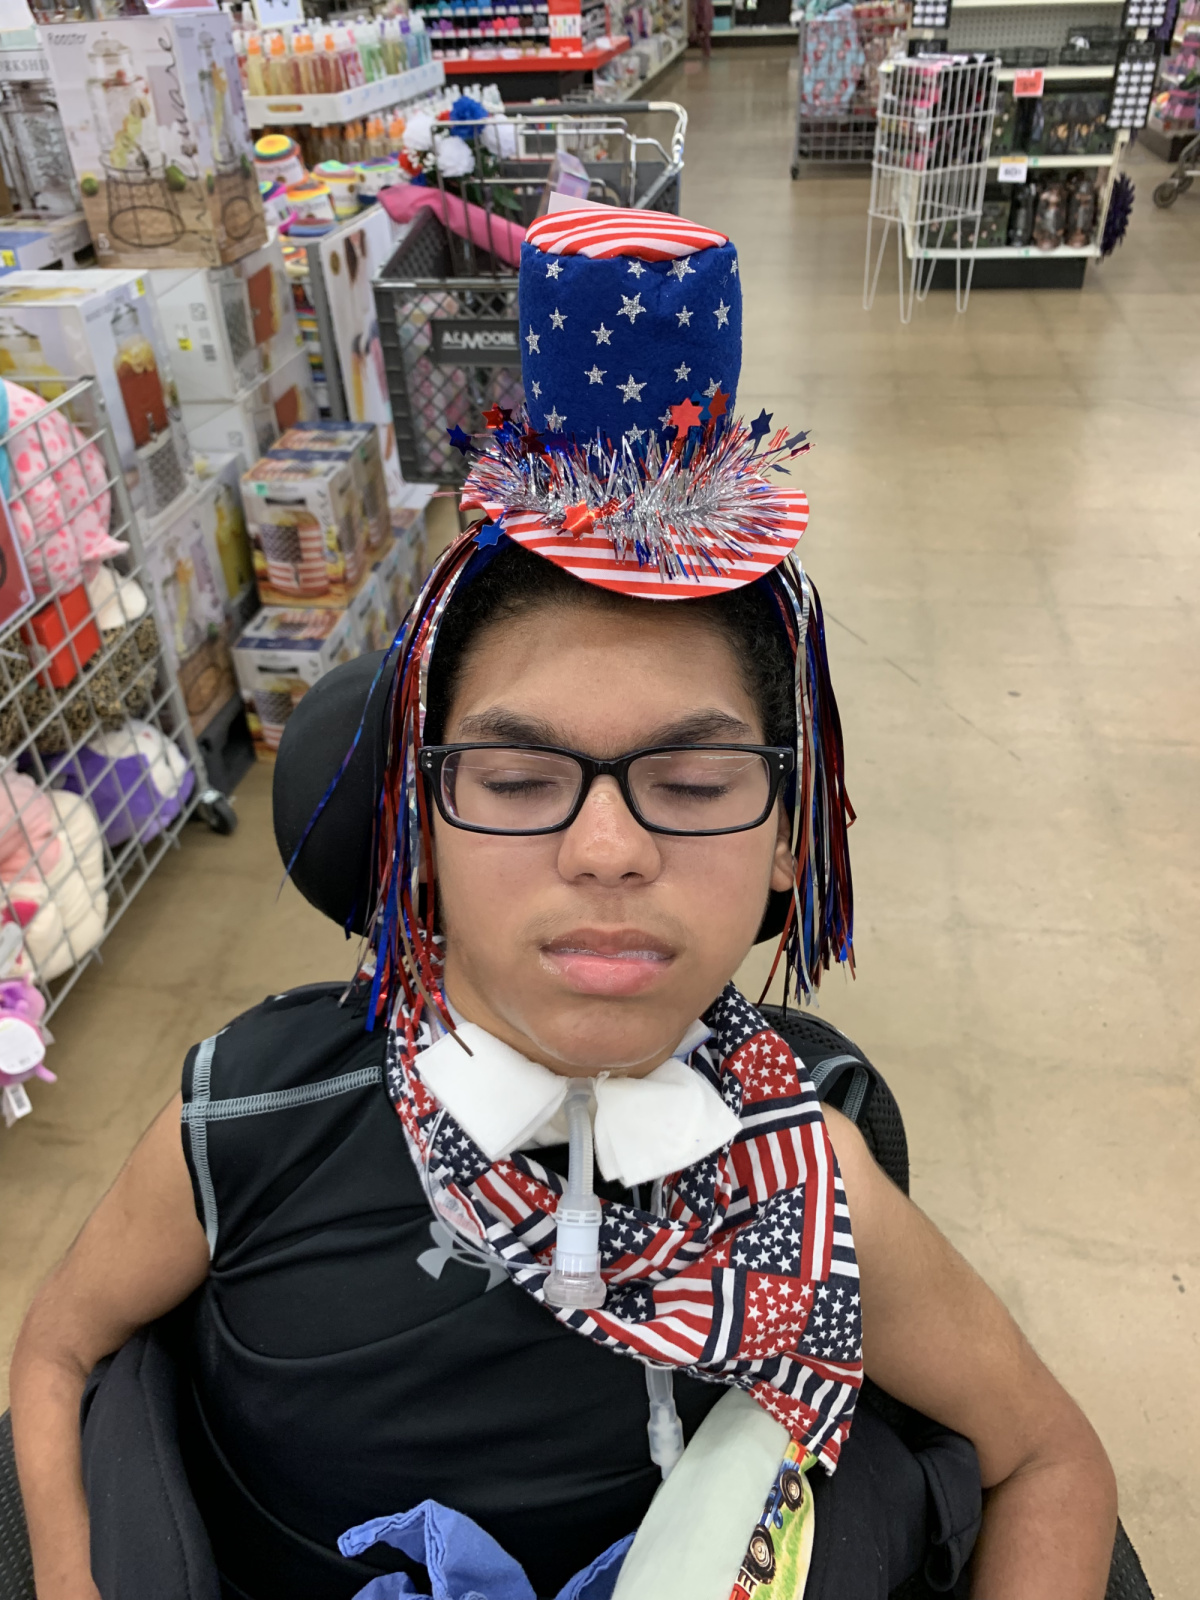 He was not impressed with the hat.  It stayed at the store